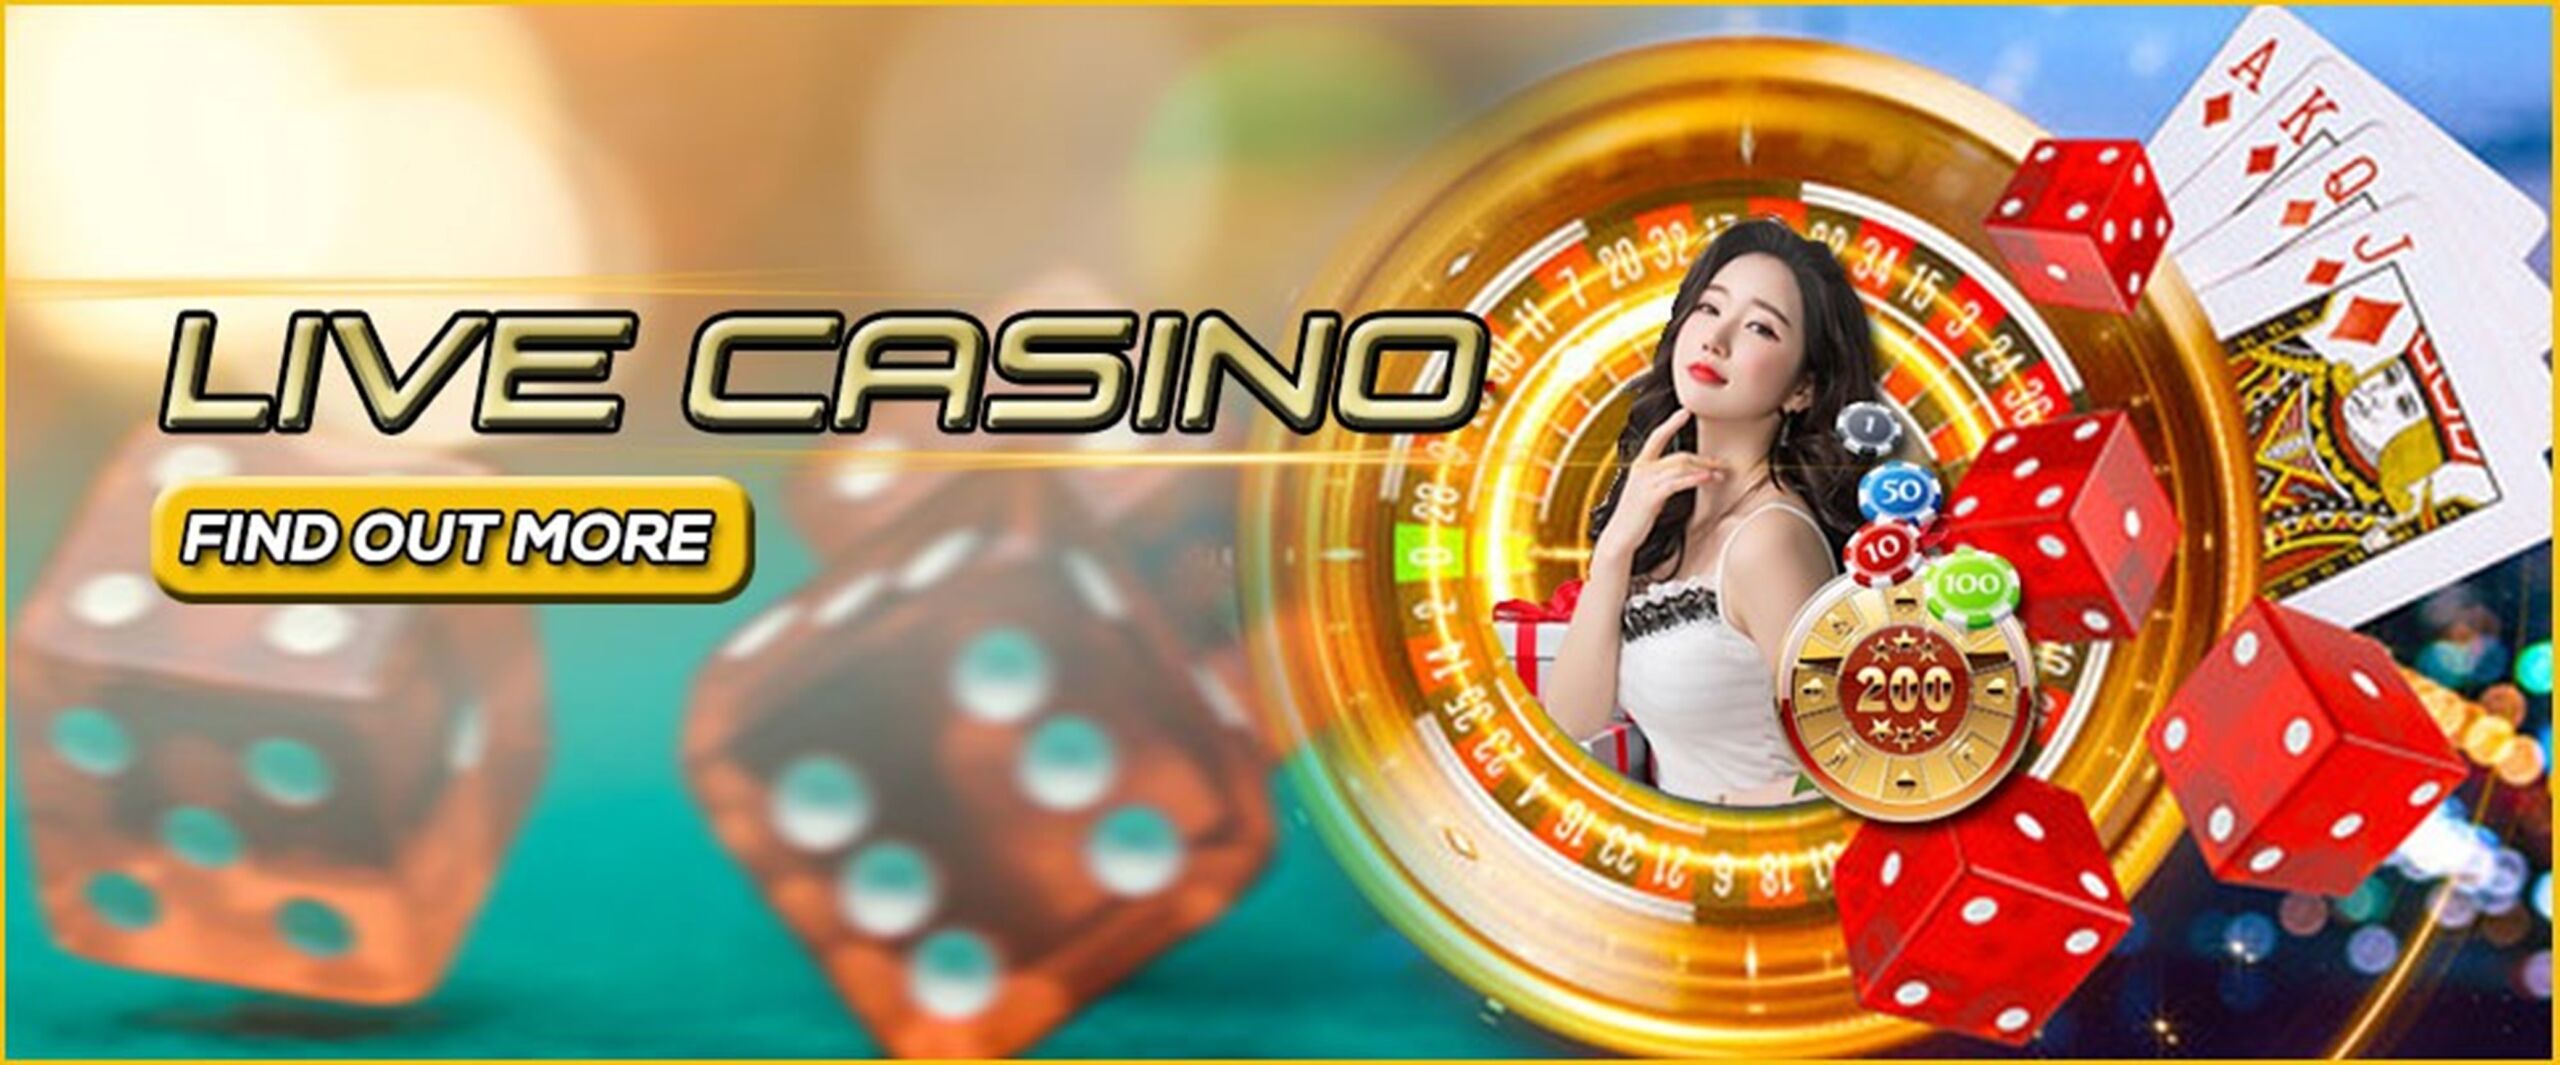 Play Live Casino Games 